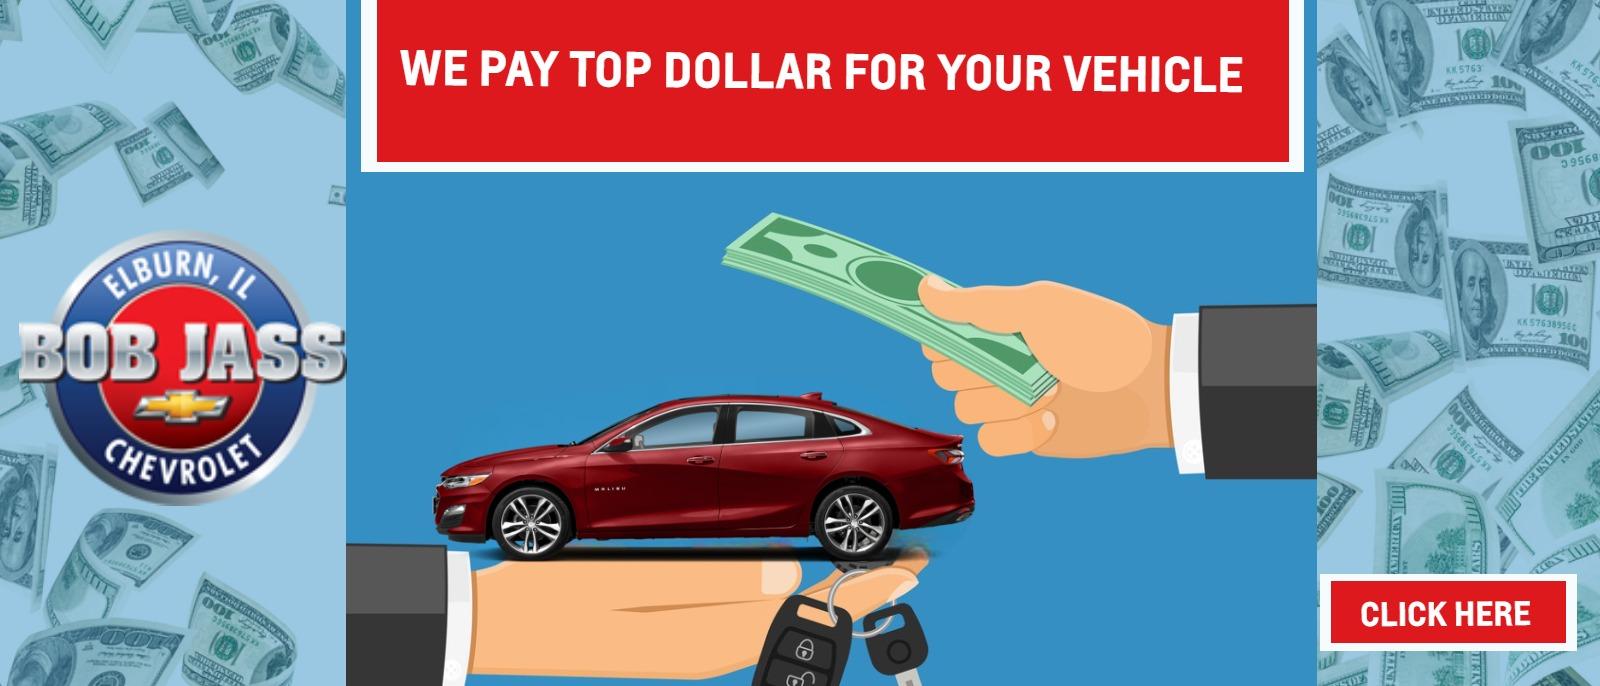 We pay top dollar for your vehicle